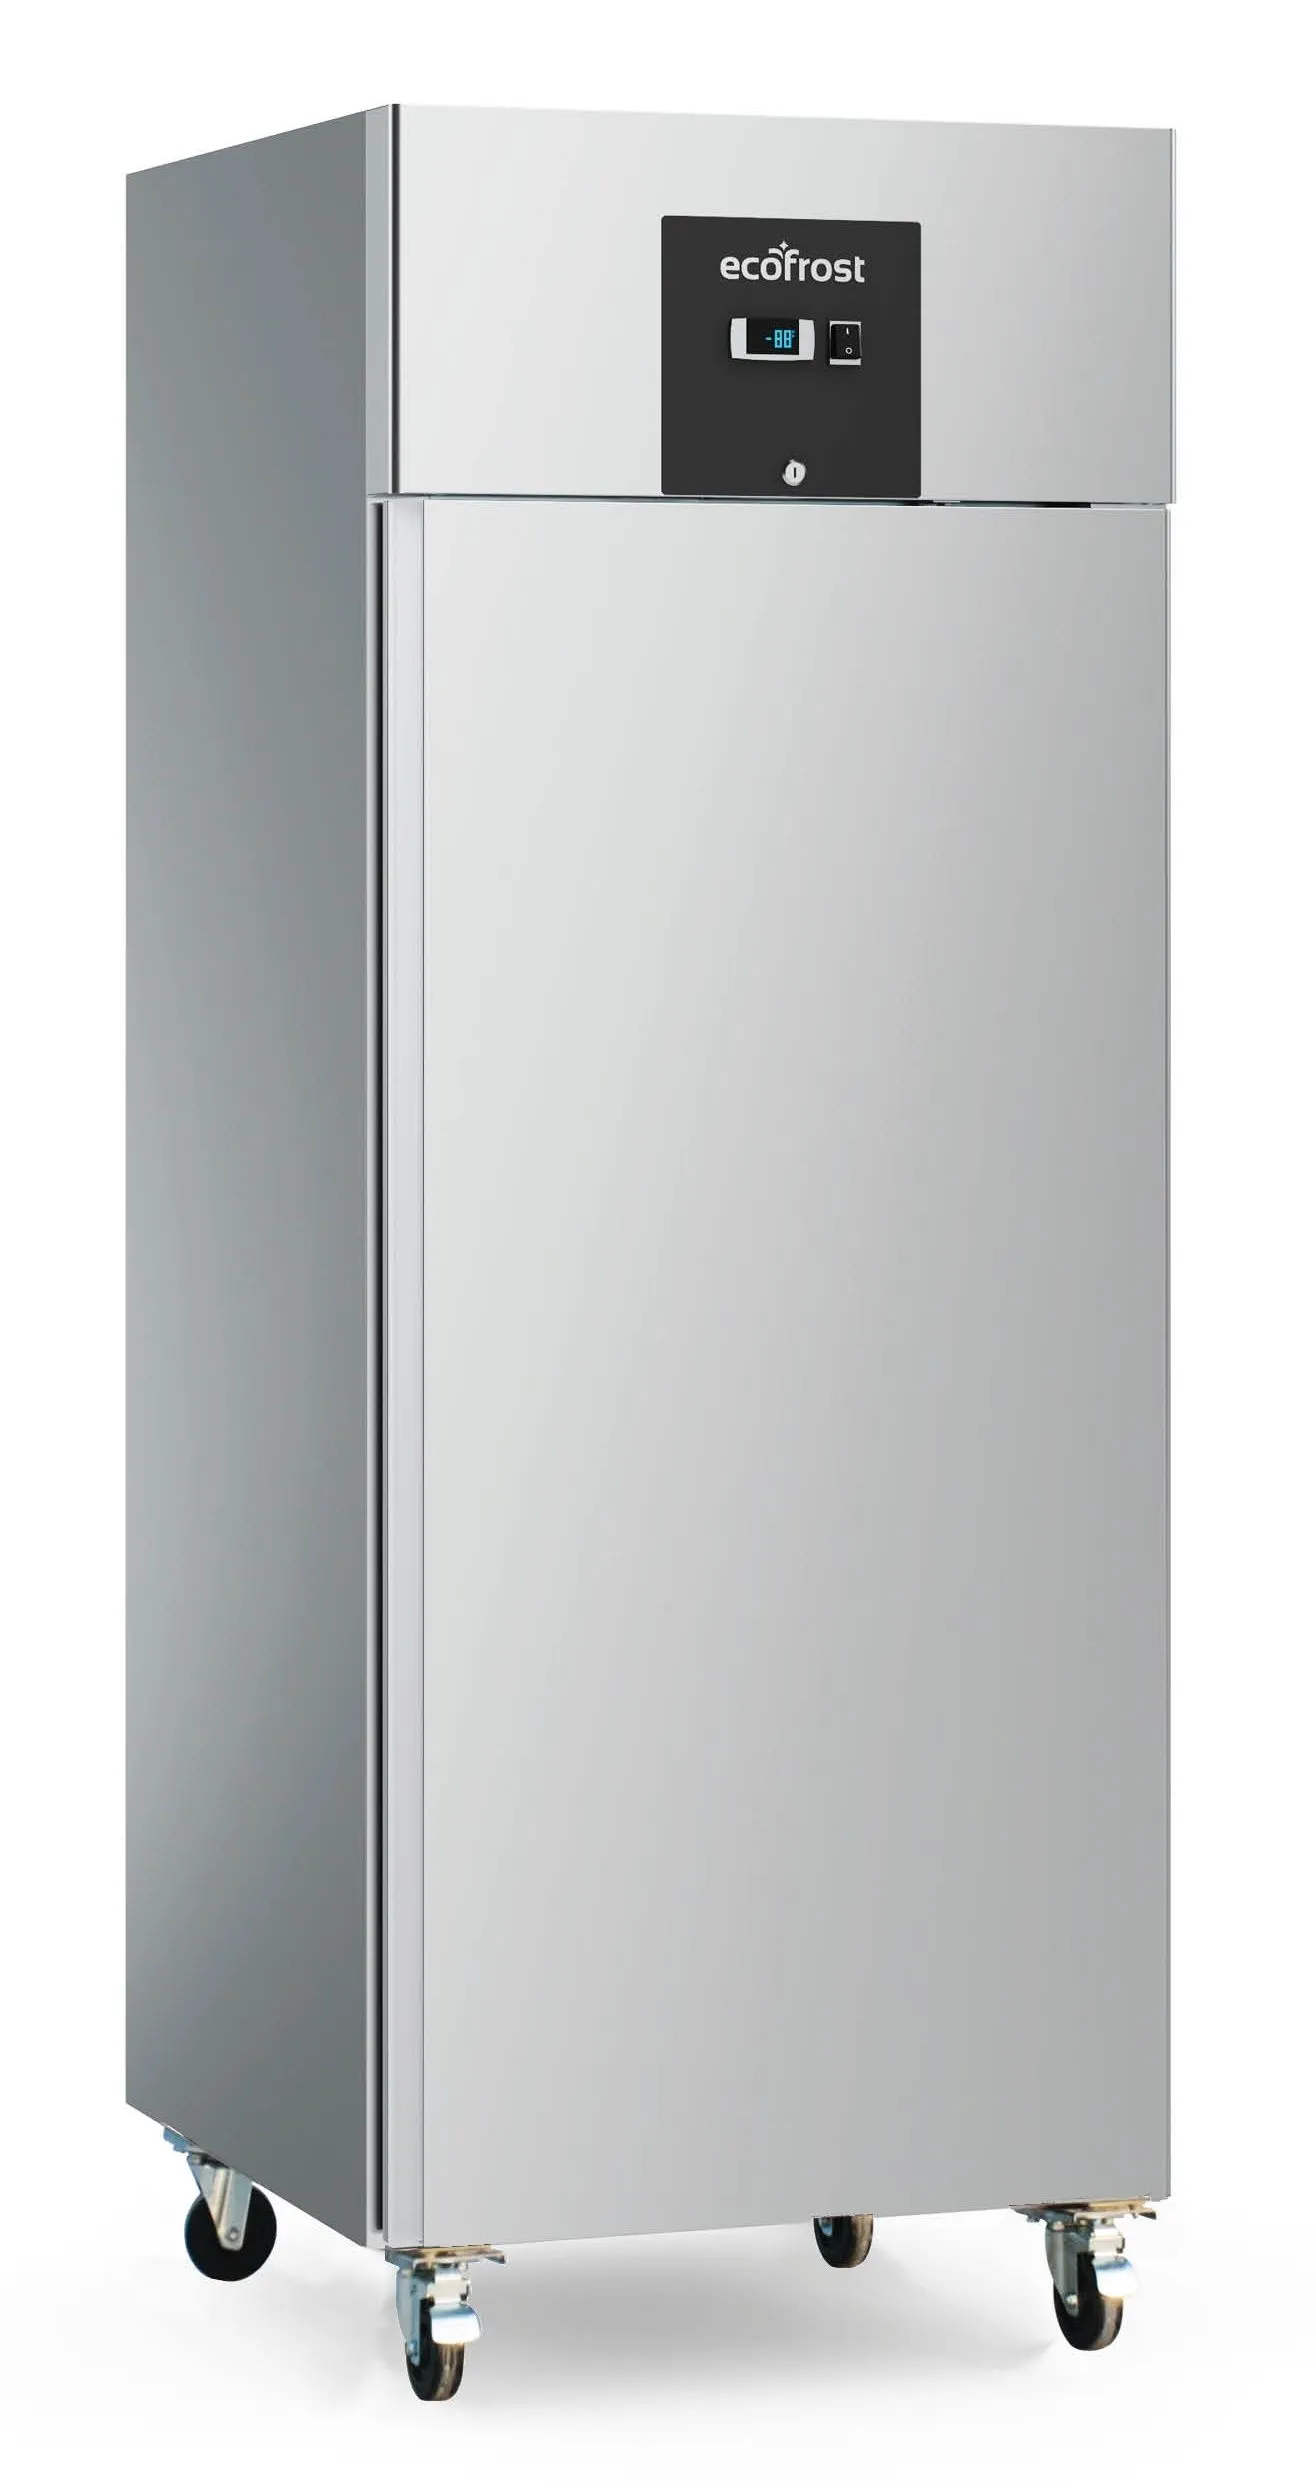 Ecofrost Stainless Steel Freezer 600 Litre Ventilated